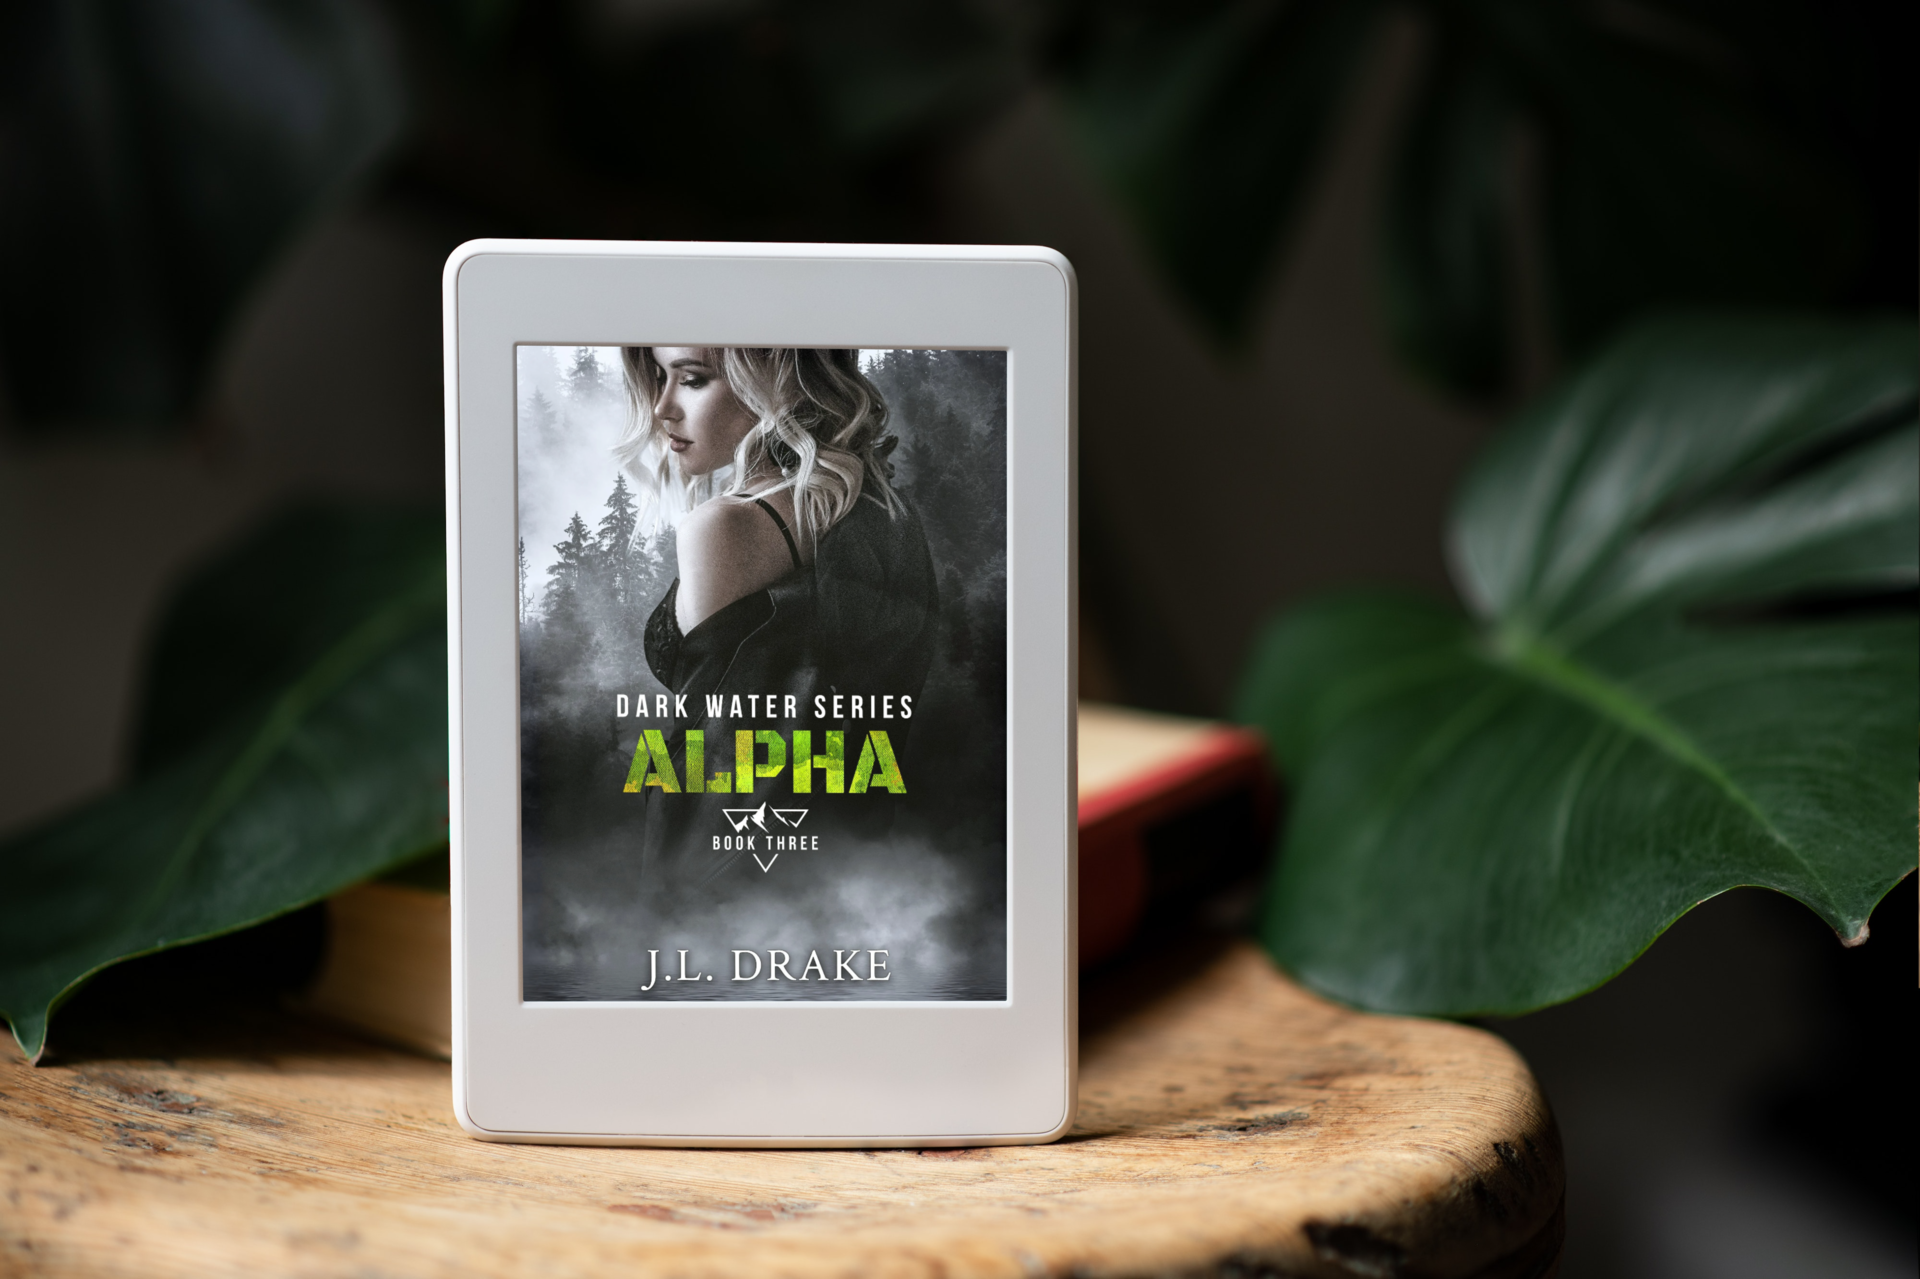 Interview with J.L Drake, author of Alpha